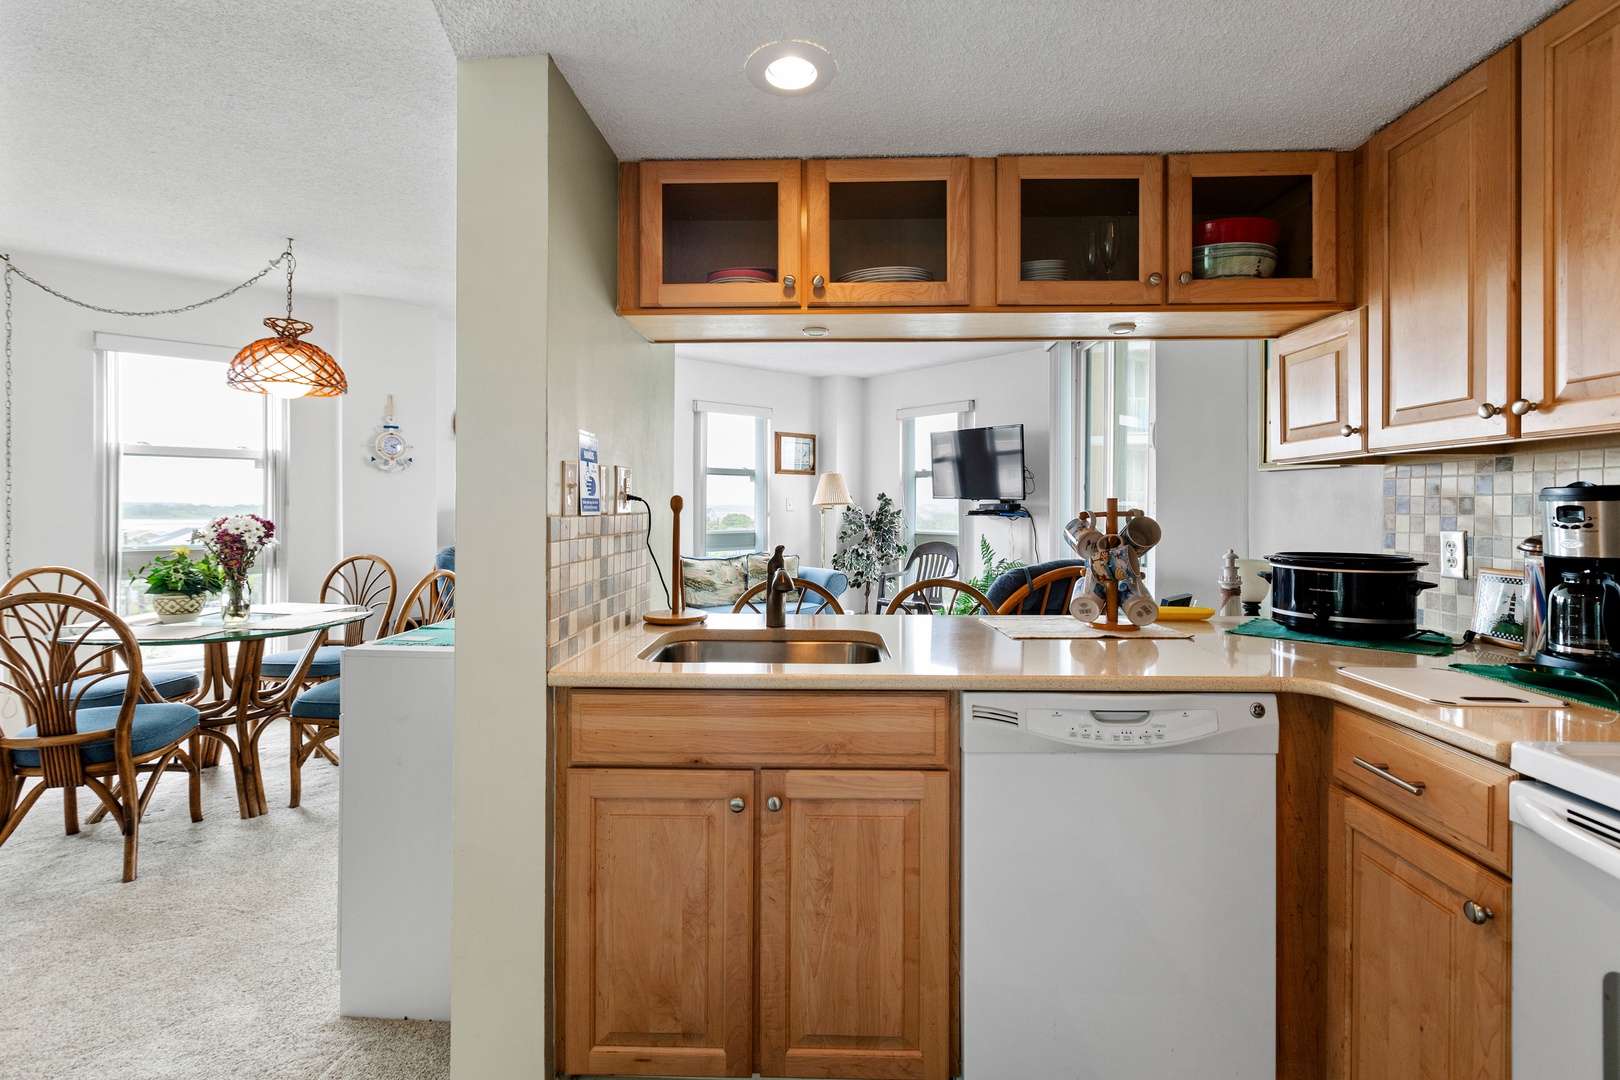 The well-stocked kitchen with countertop seating for 3